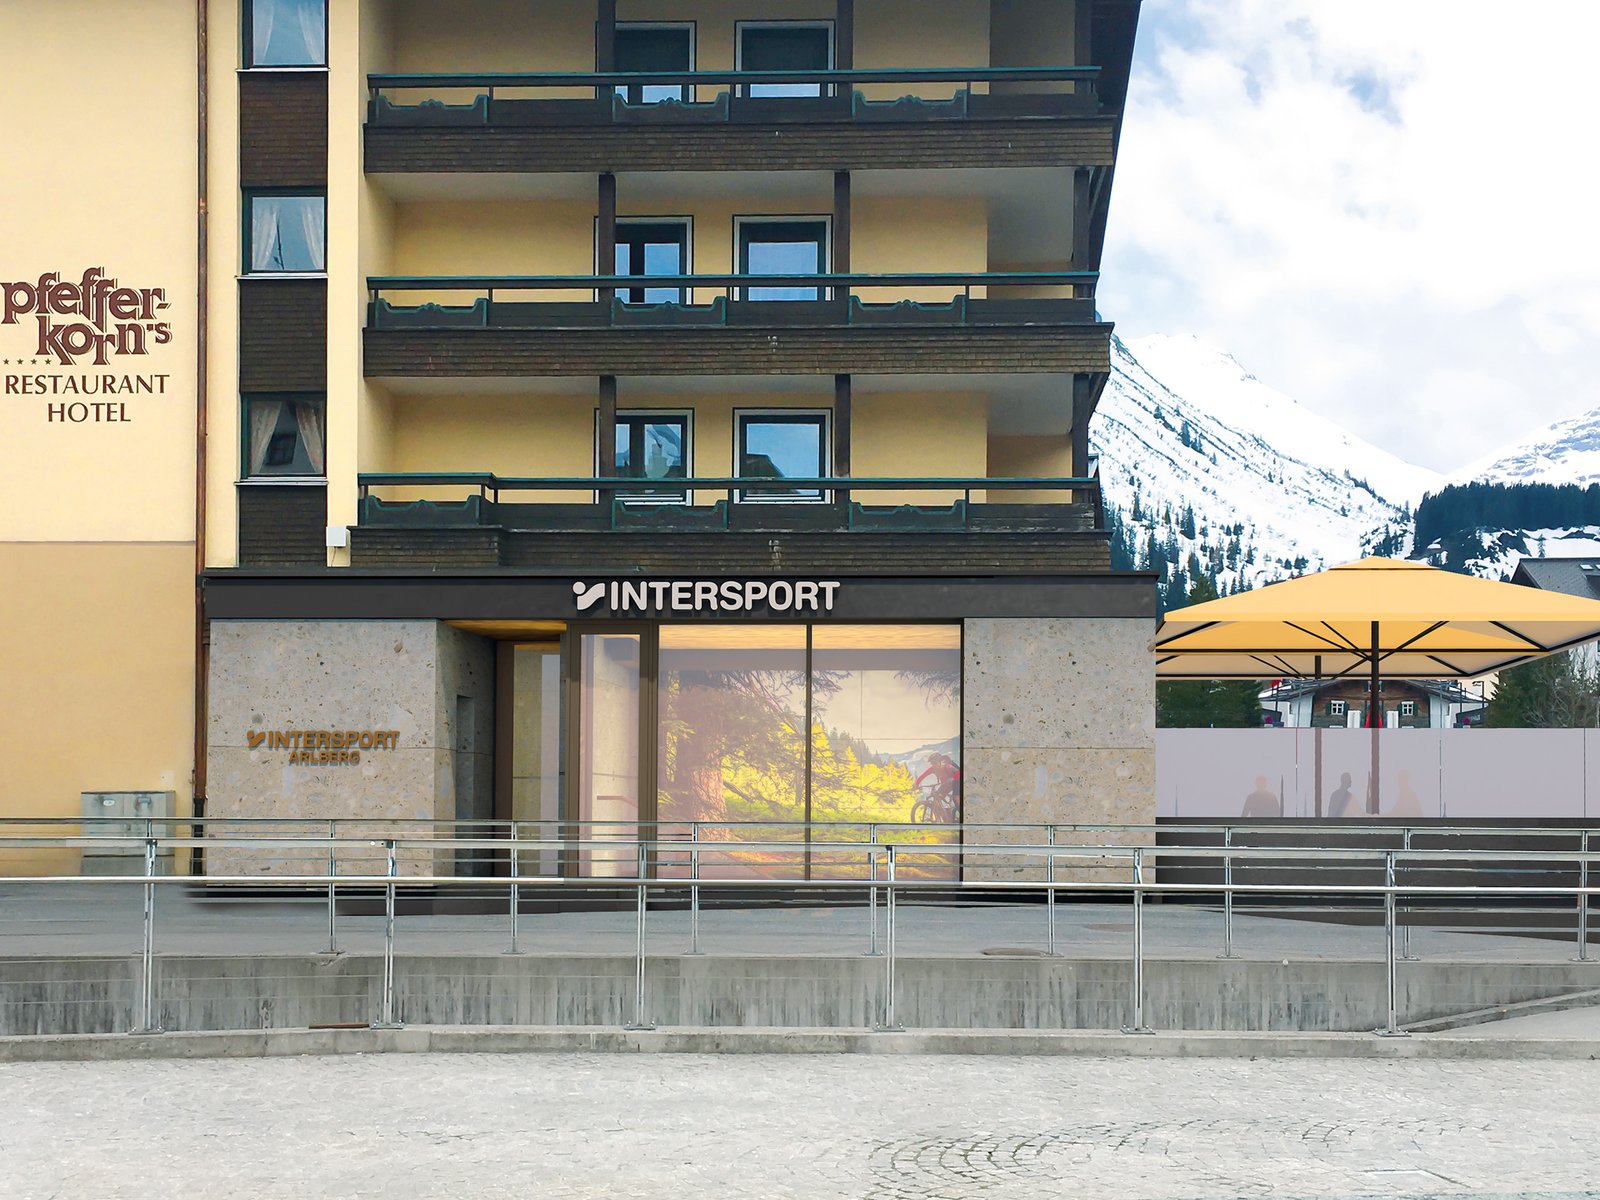 Stop by! Visit our new Intersport Arlberg rental shop at the Rüfikopfbahn in Lech